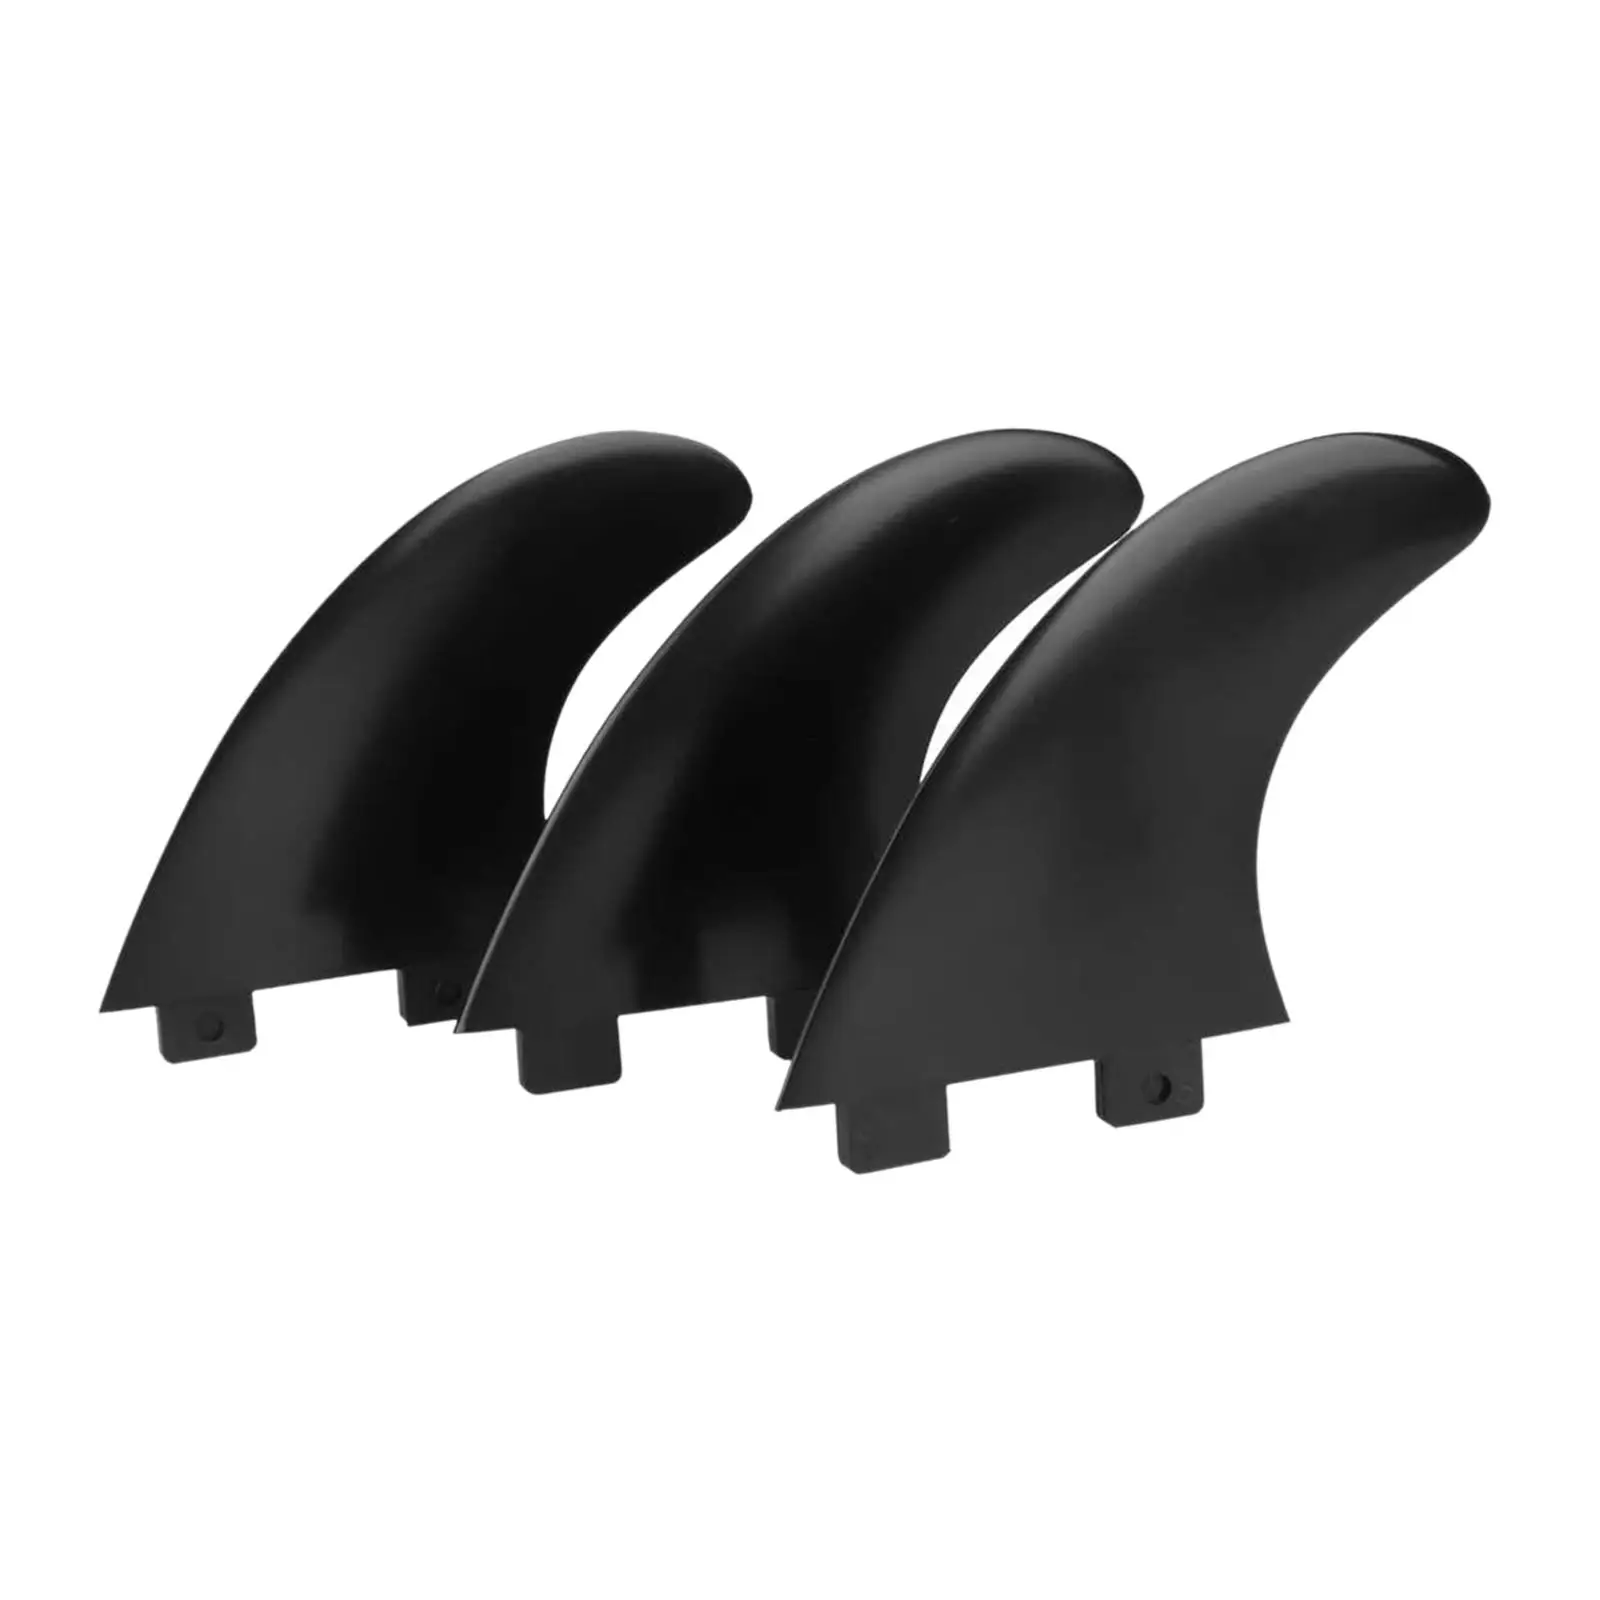 3Pcs Surfboard Fins Easy Installation Replacement Surfing Fin for Longboards Water Sports Stand up Paddleboard Dinghy Parts